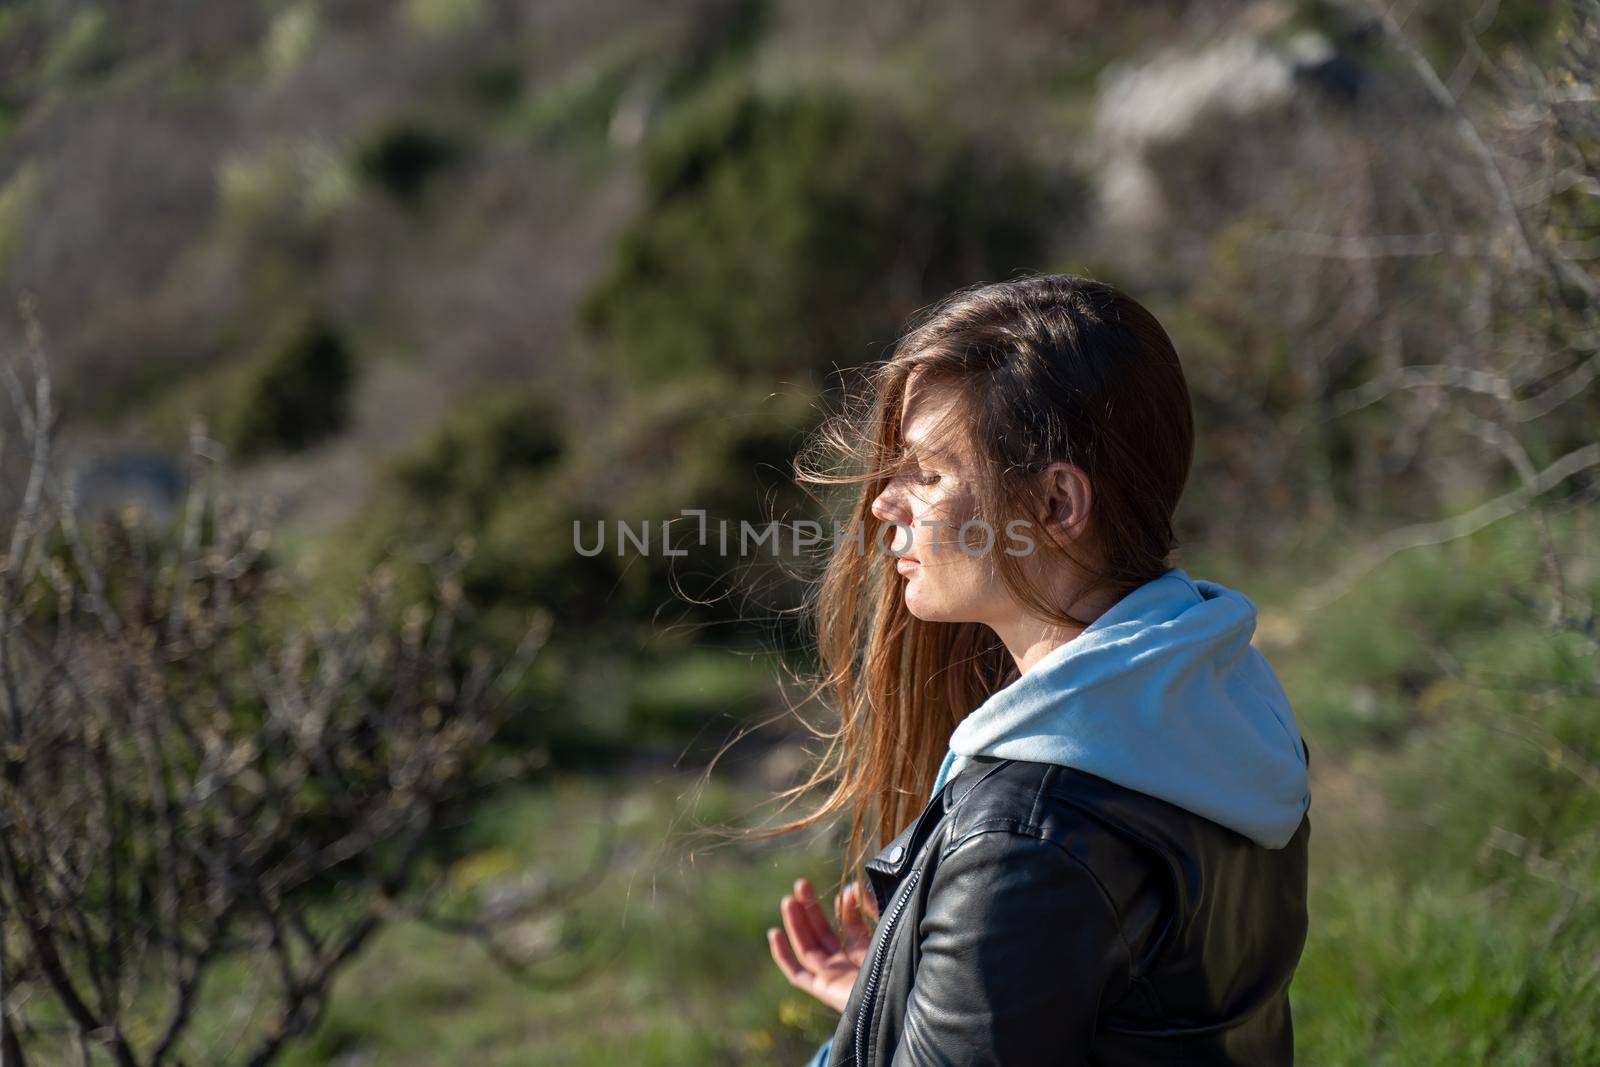 Woman tourist enjoying the sunset over the sea mountain landscape. Sits outdoors on a rock above the sea. She is wearing jeans, a blue hoodie and a black leather jacket. Healthy lifestyle, harmony and meditation.